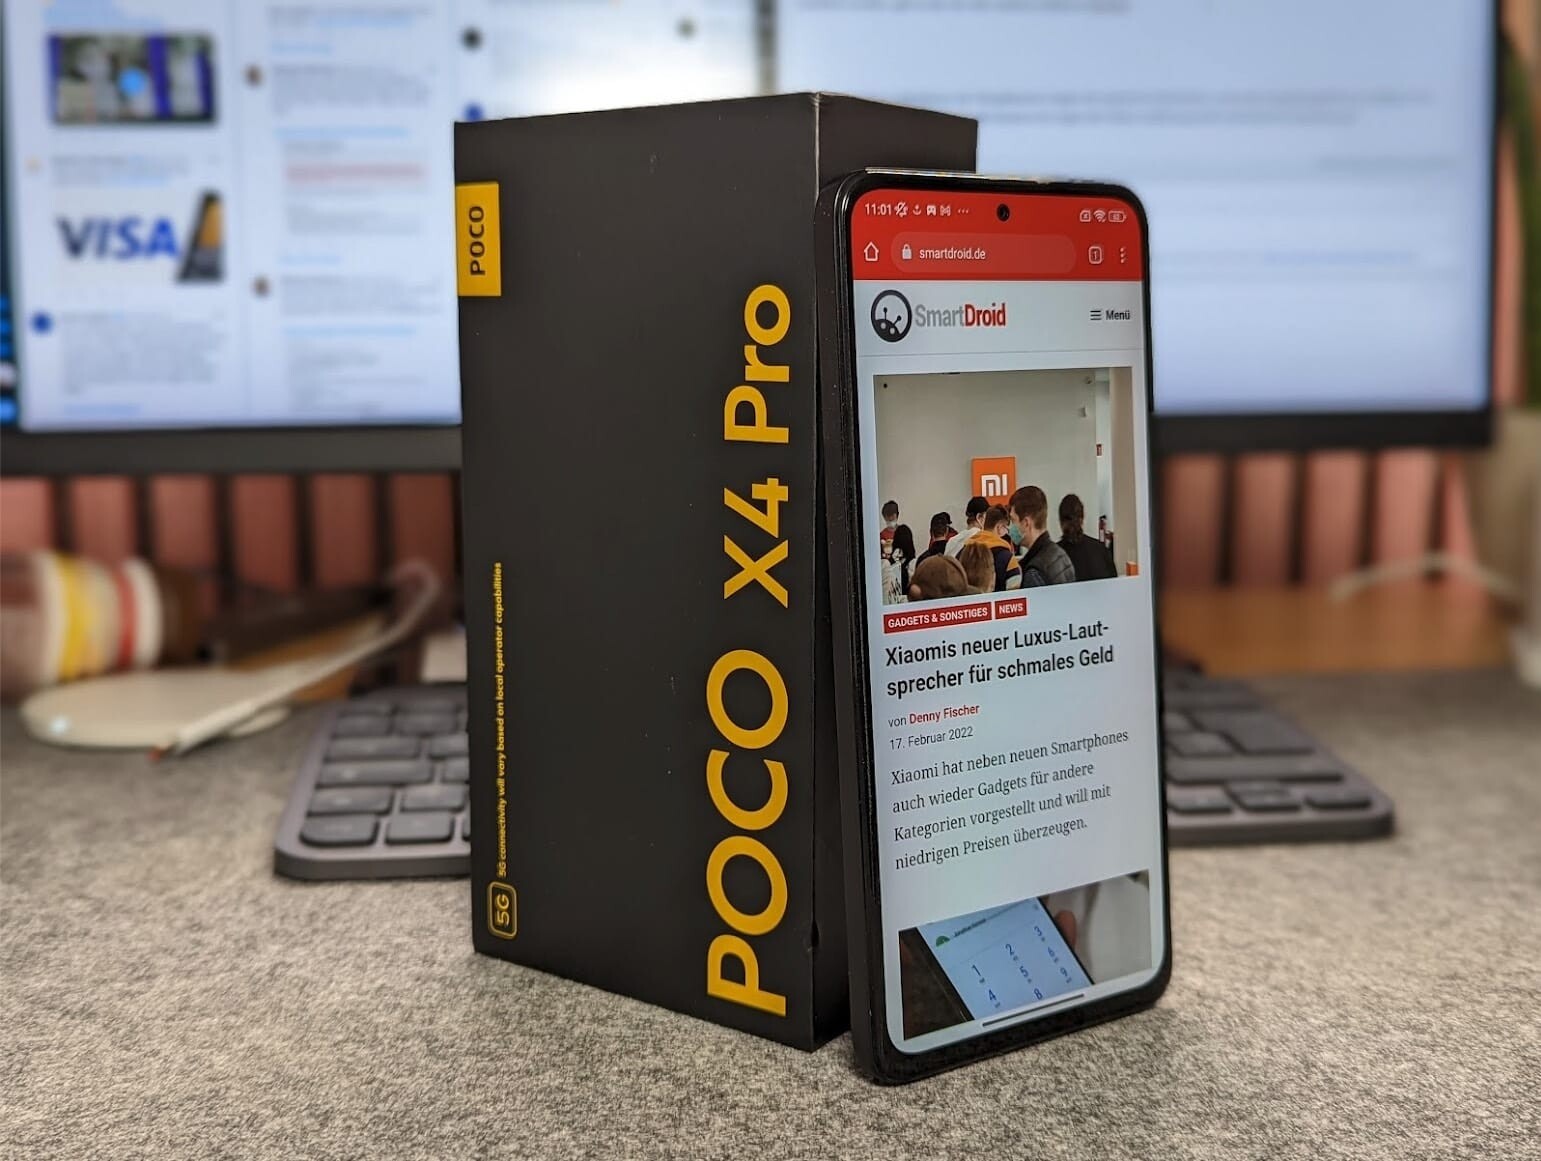 Xiaomi POCO X4 Pro 5G: Specifications and hands-on photos leak of upcoming  108 MP, 120 Hz and Snapdragon 695-backed smartphone - NotebookCheck.net News